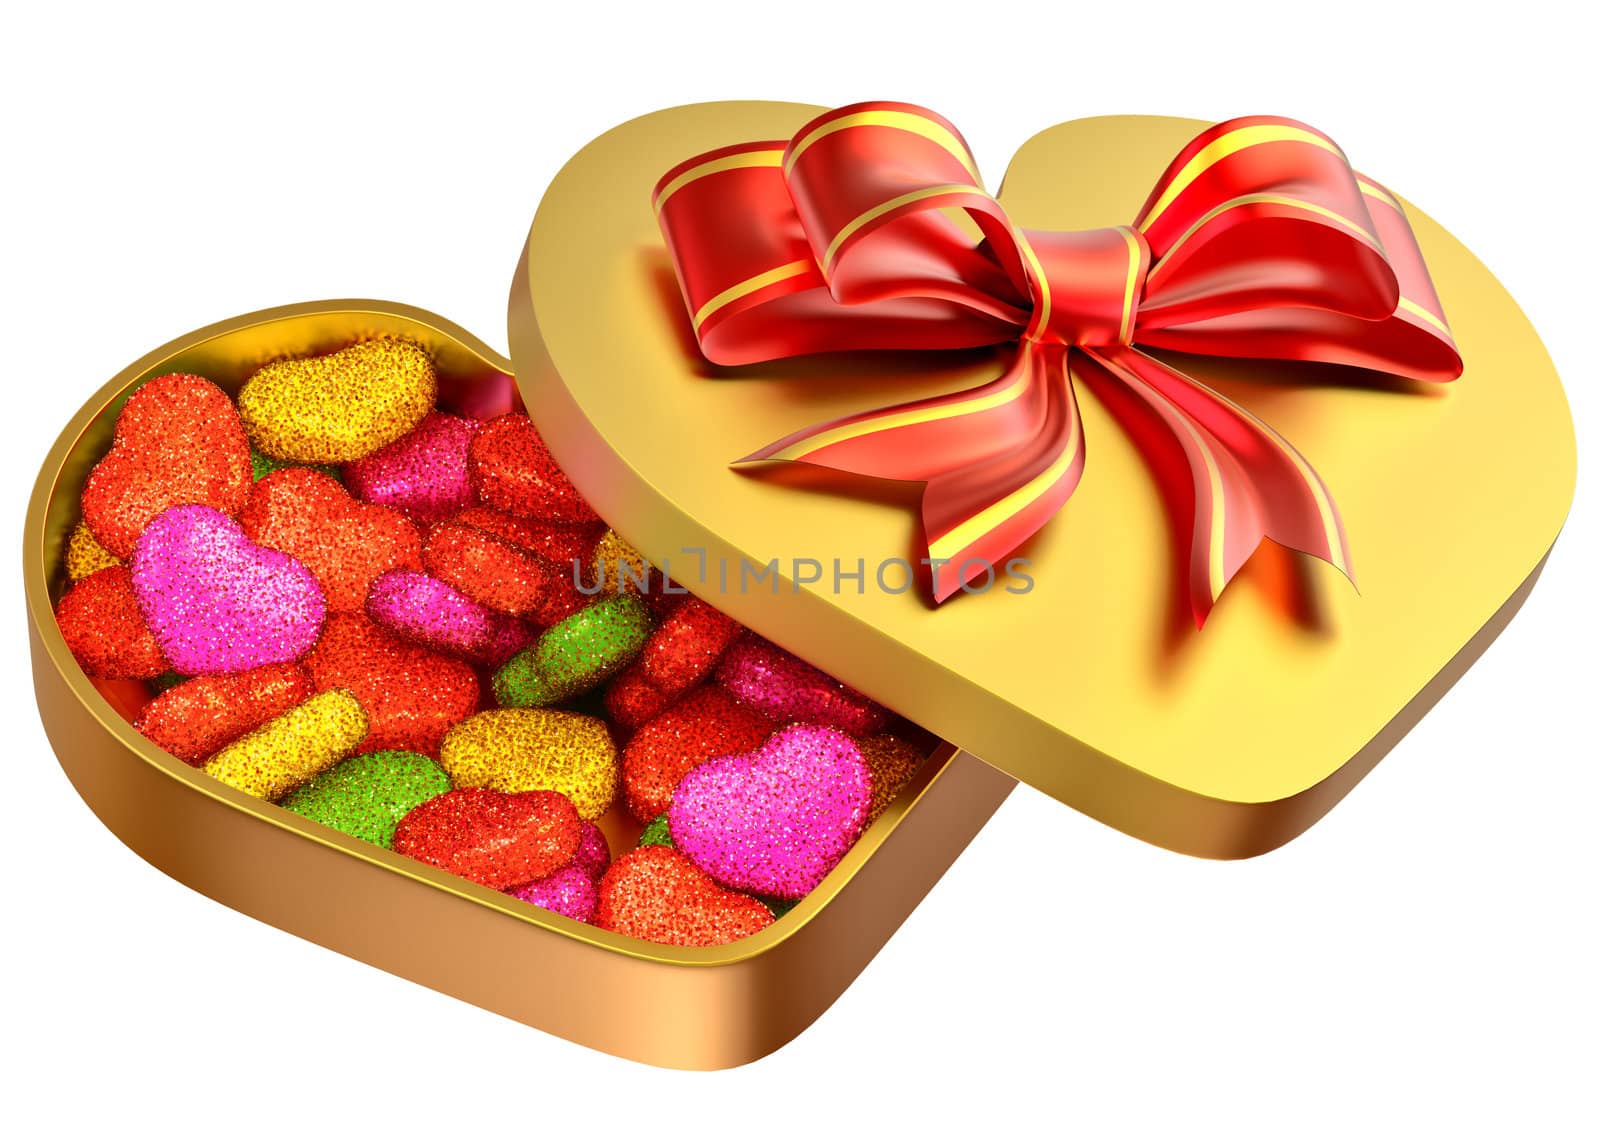 Allsorts sugared candy in the form of heart in a golden box with a red bow as a sweet gift for perfect Valentine's Day.